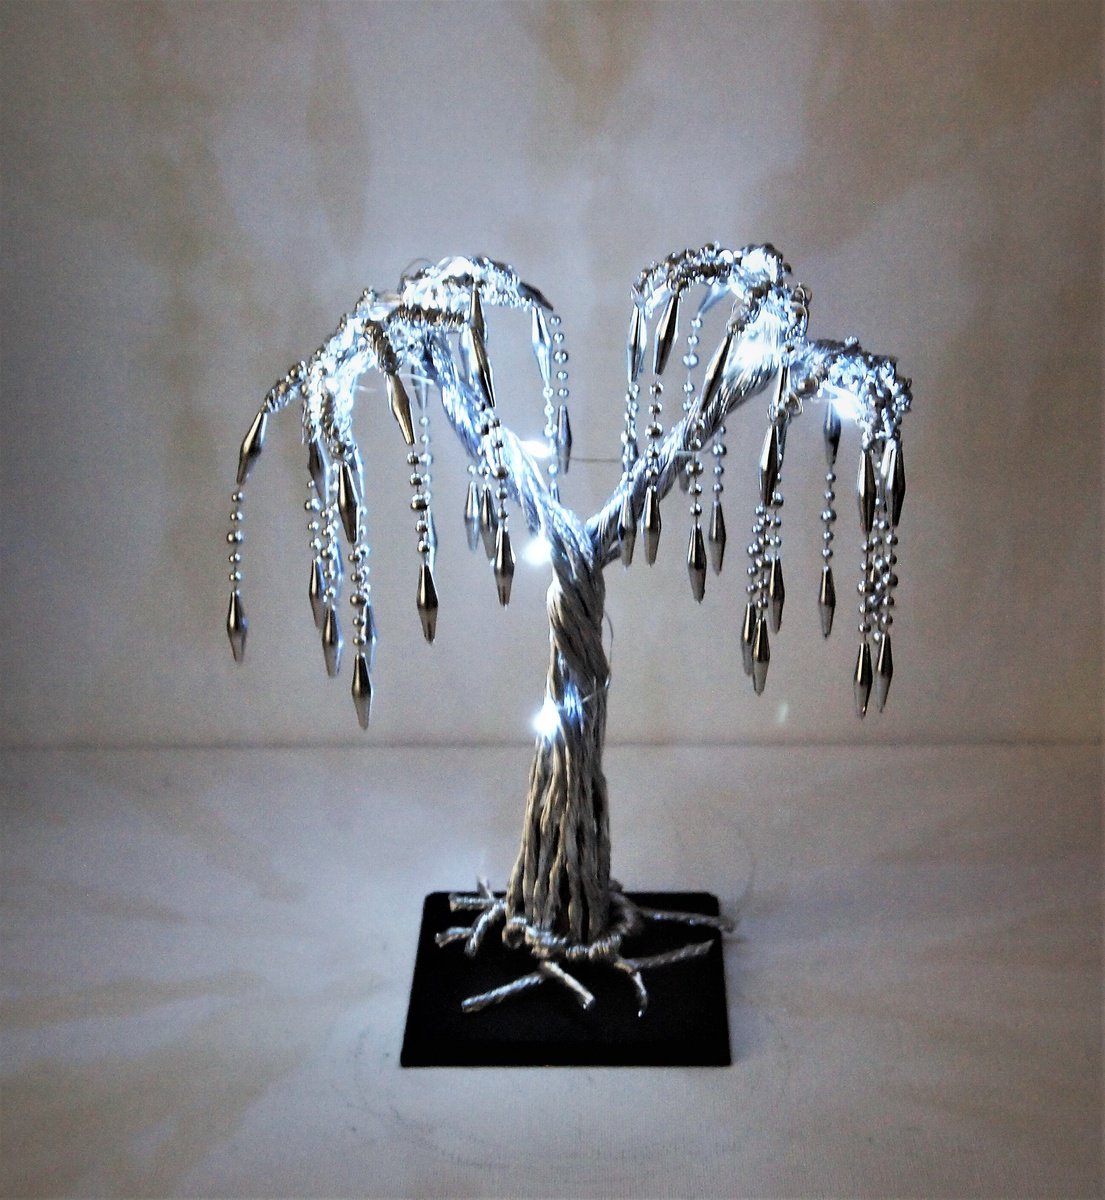 Silver Weeping Willow tree by Steph Morgan